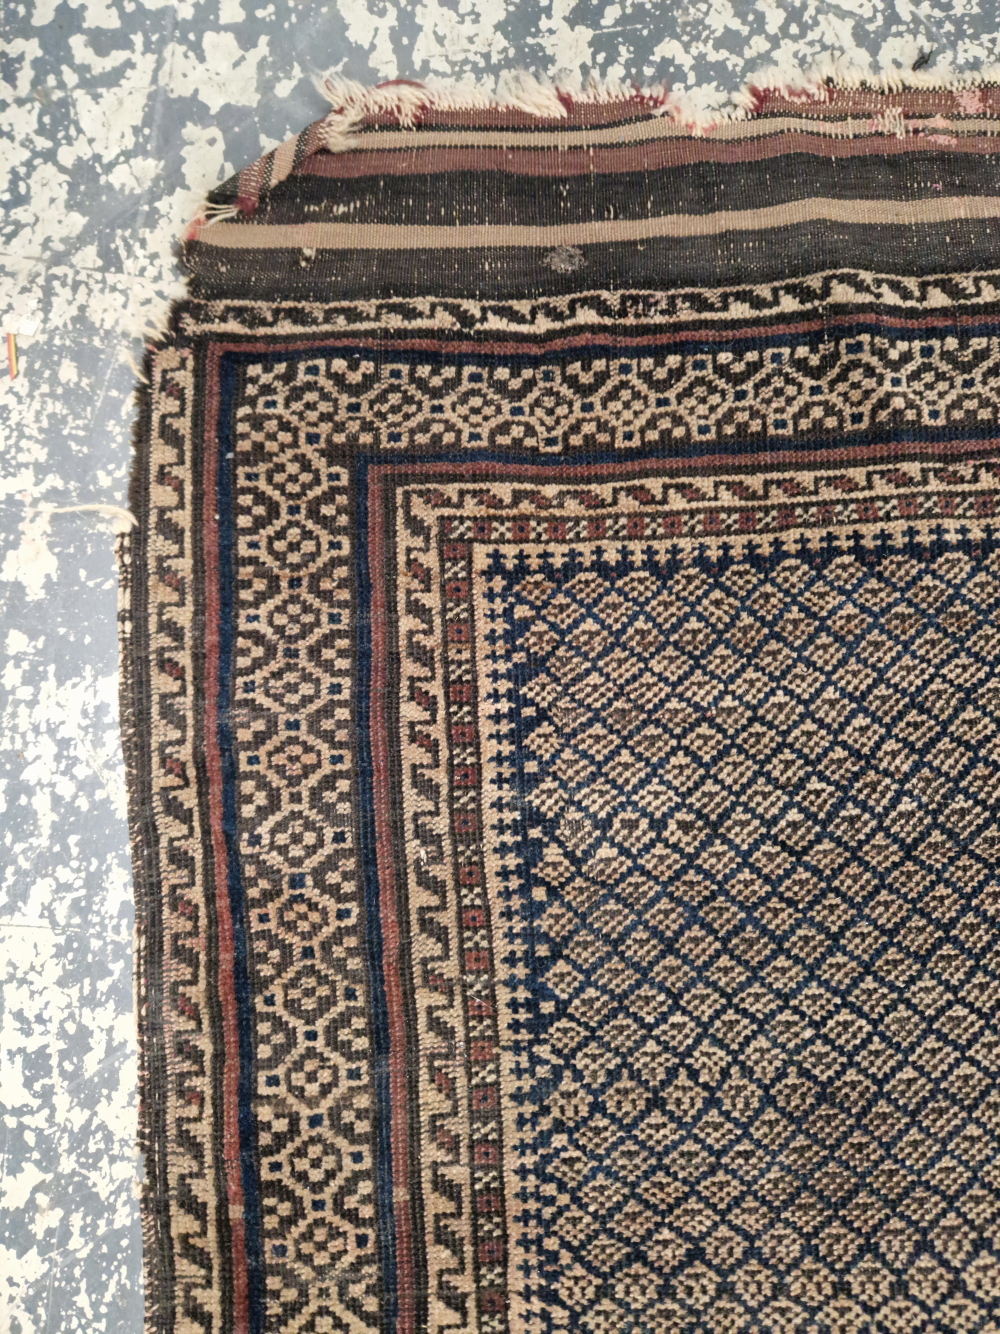 AN ANTIQUE BELOUCH RUG 170 x 116 cm. - Image 5 of 6